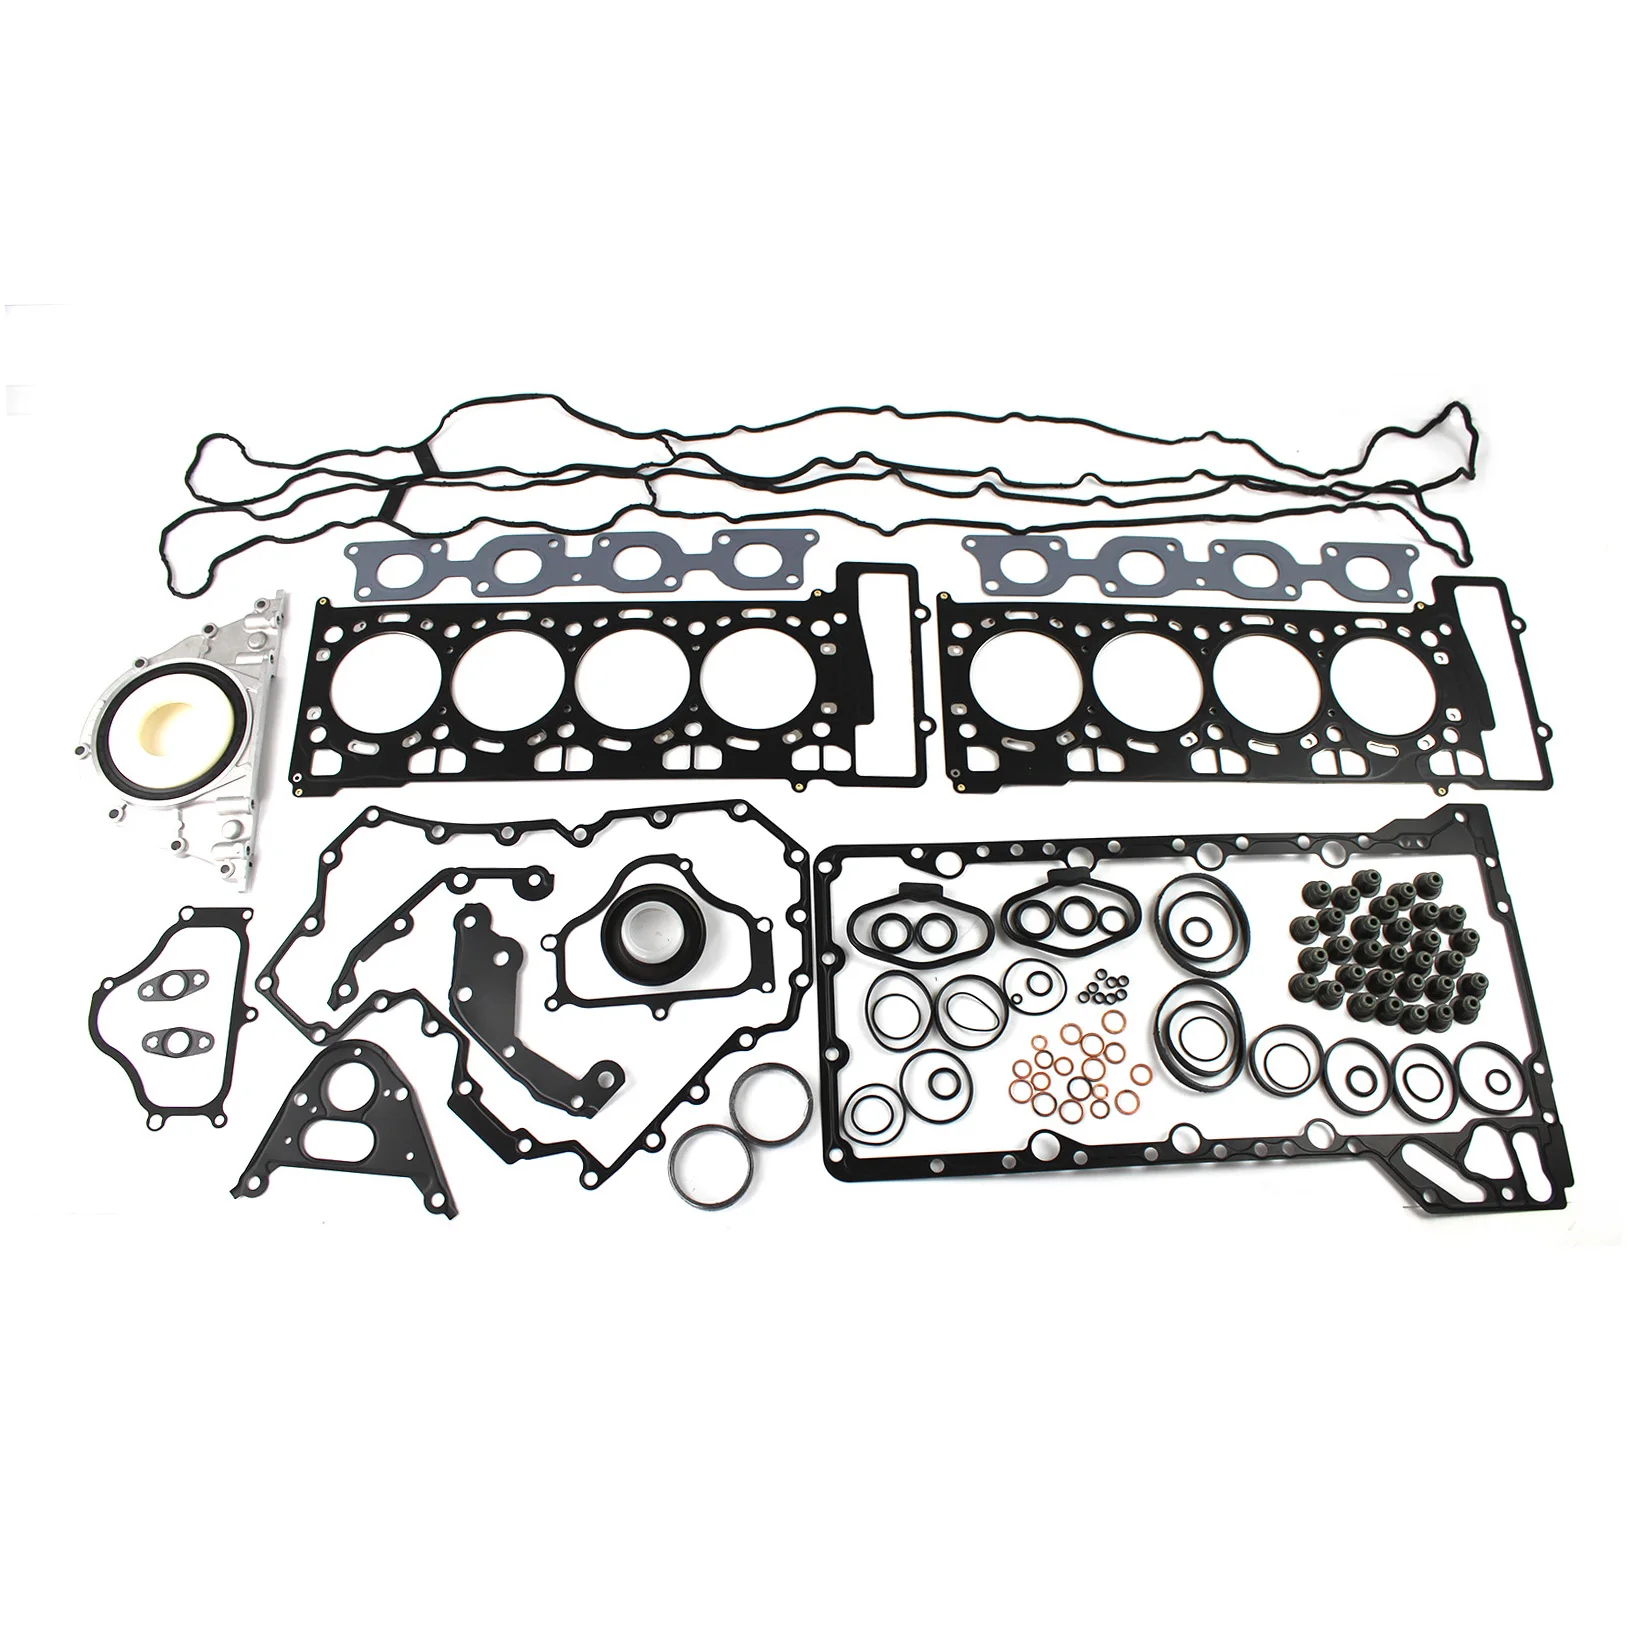 New N63 4.4T Engine Overhaul Gasket Set For BMW 550i 750Li X5 X6 F10 F02 F07 E70 E71 Aftermarket Parts with 12 Month Warranty